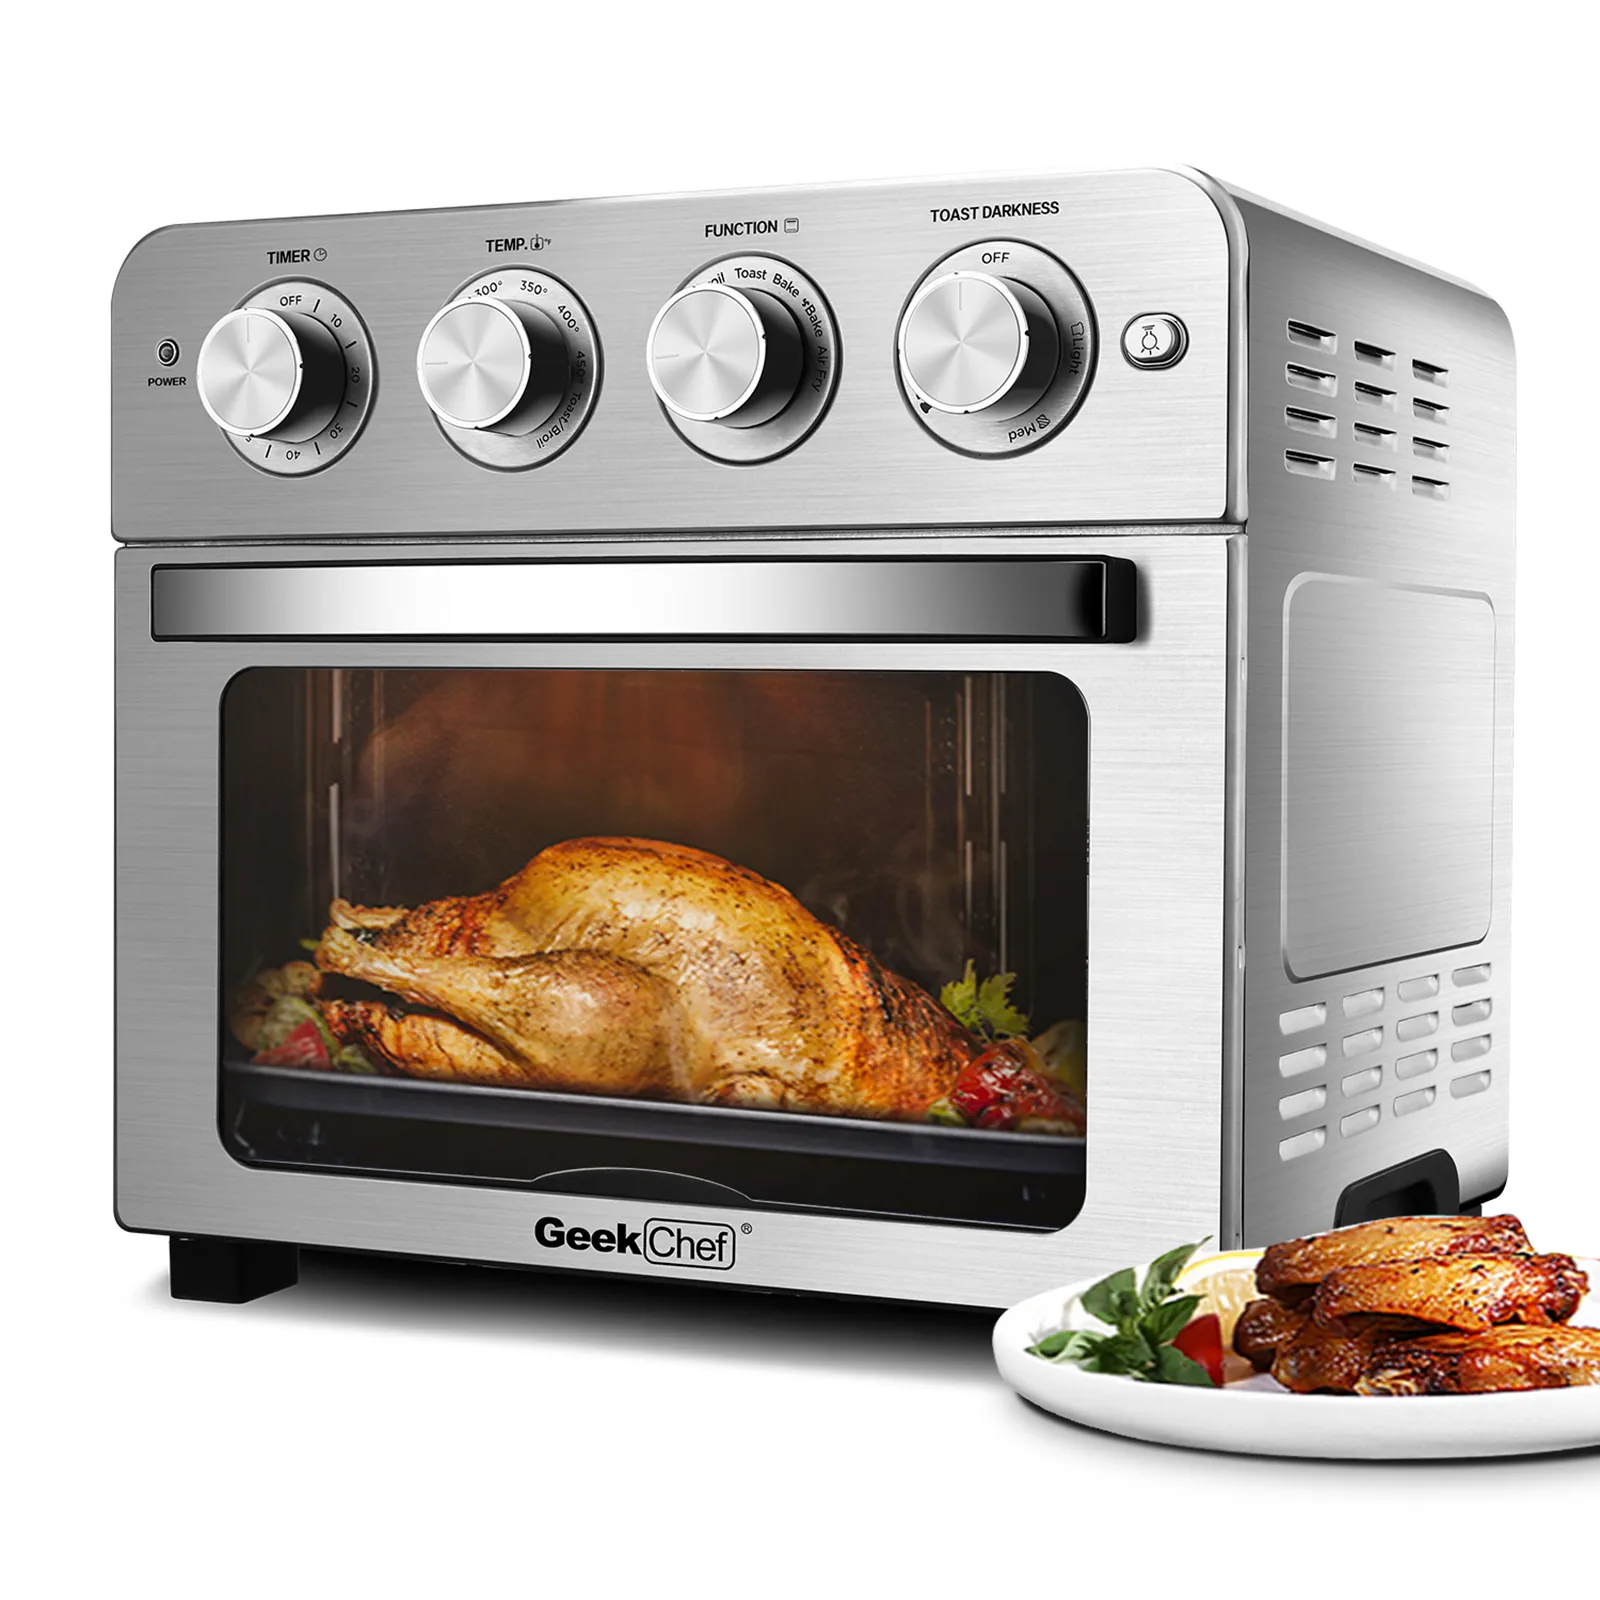 Geek Chef Air Fryer, 6 Slice 26QT Air Fryer Toaster Oven Combo, Air Fryer  Oven,Roast, Bake, Broil, Reheat, Fry Oil-Free, Extra Large Convection